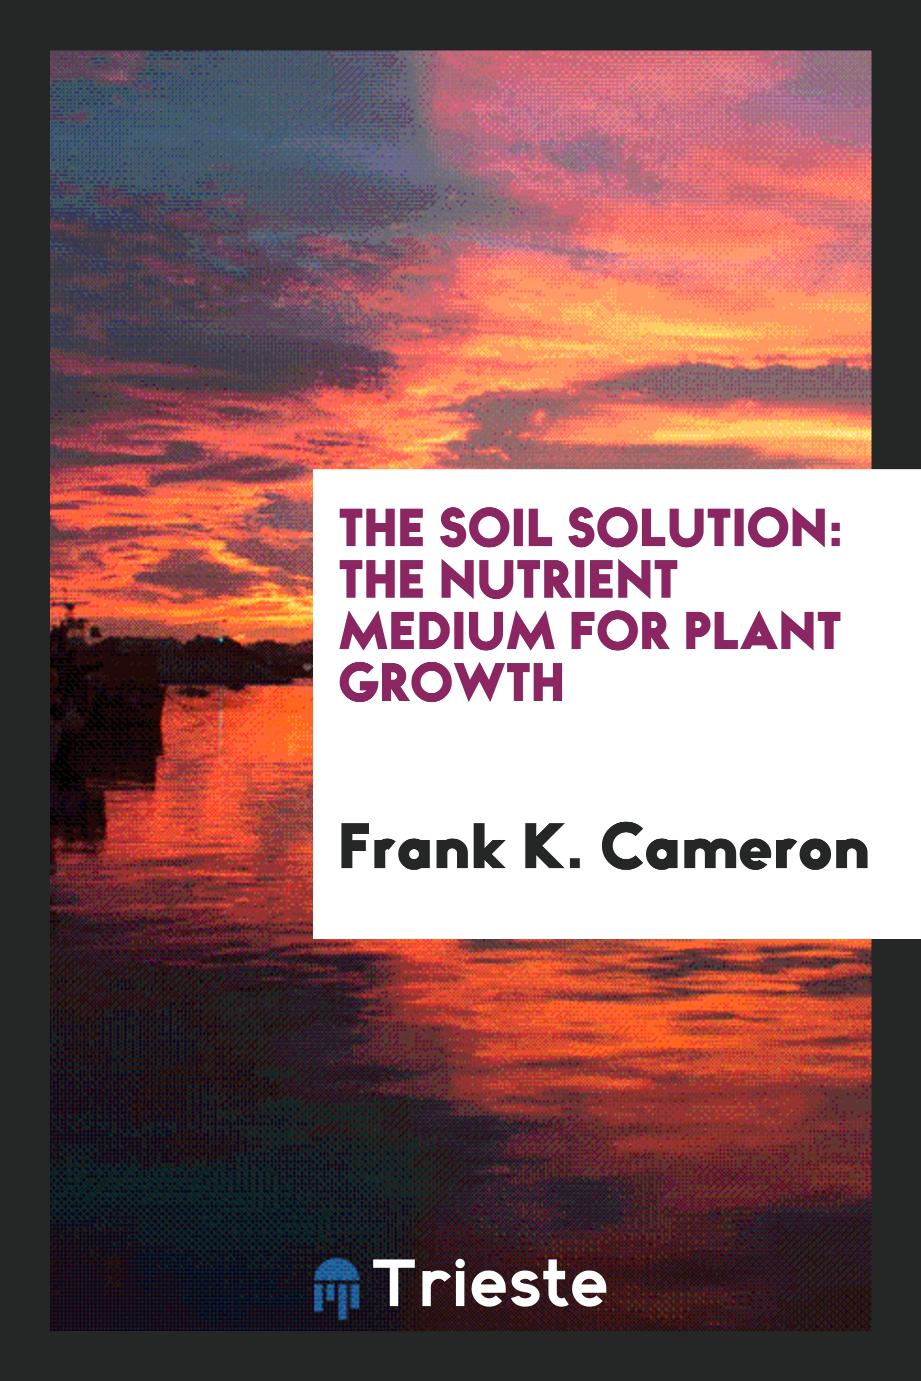 The Soil Solution: The Nutrient Medium for Plant Growth